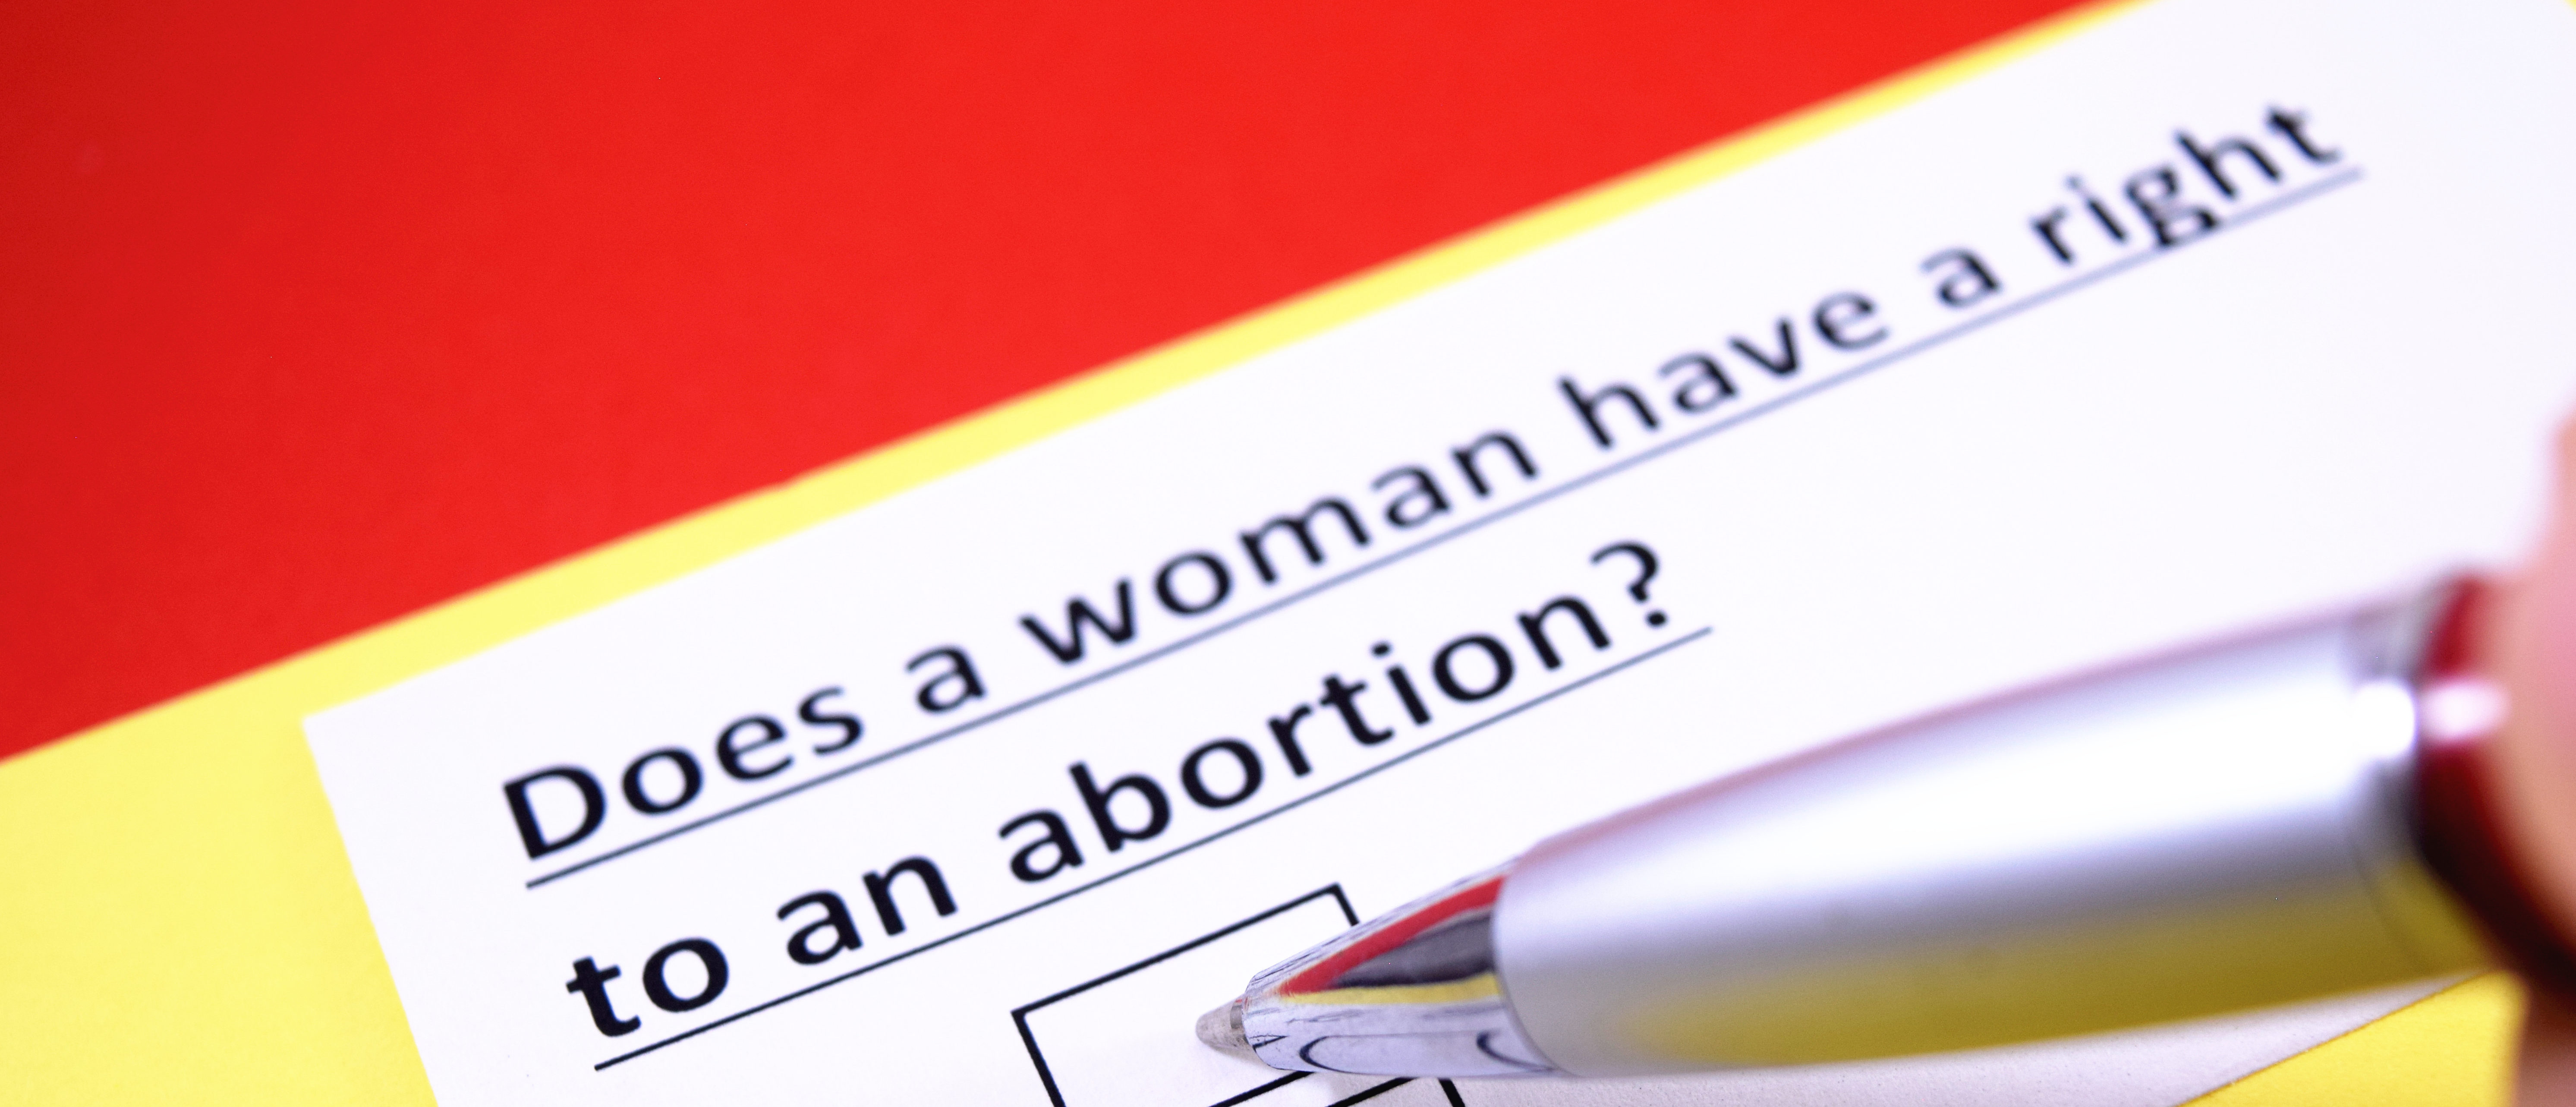 Alabama And West Virginia To Vote On Stripping Abortion Protections From State ...5970 x 2565